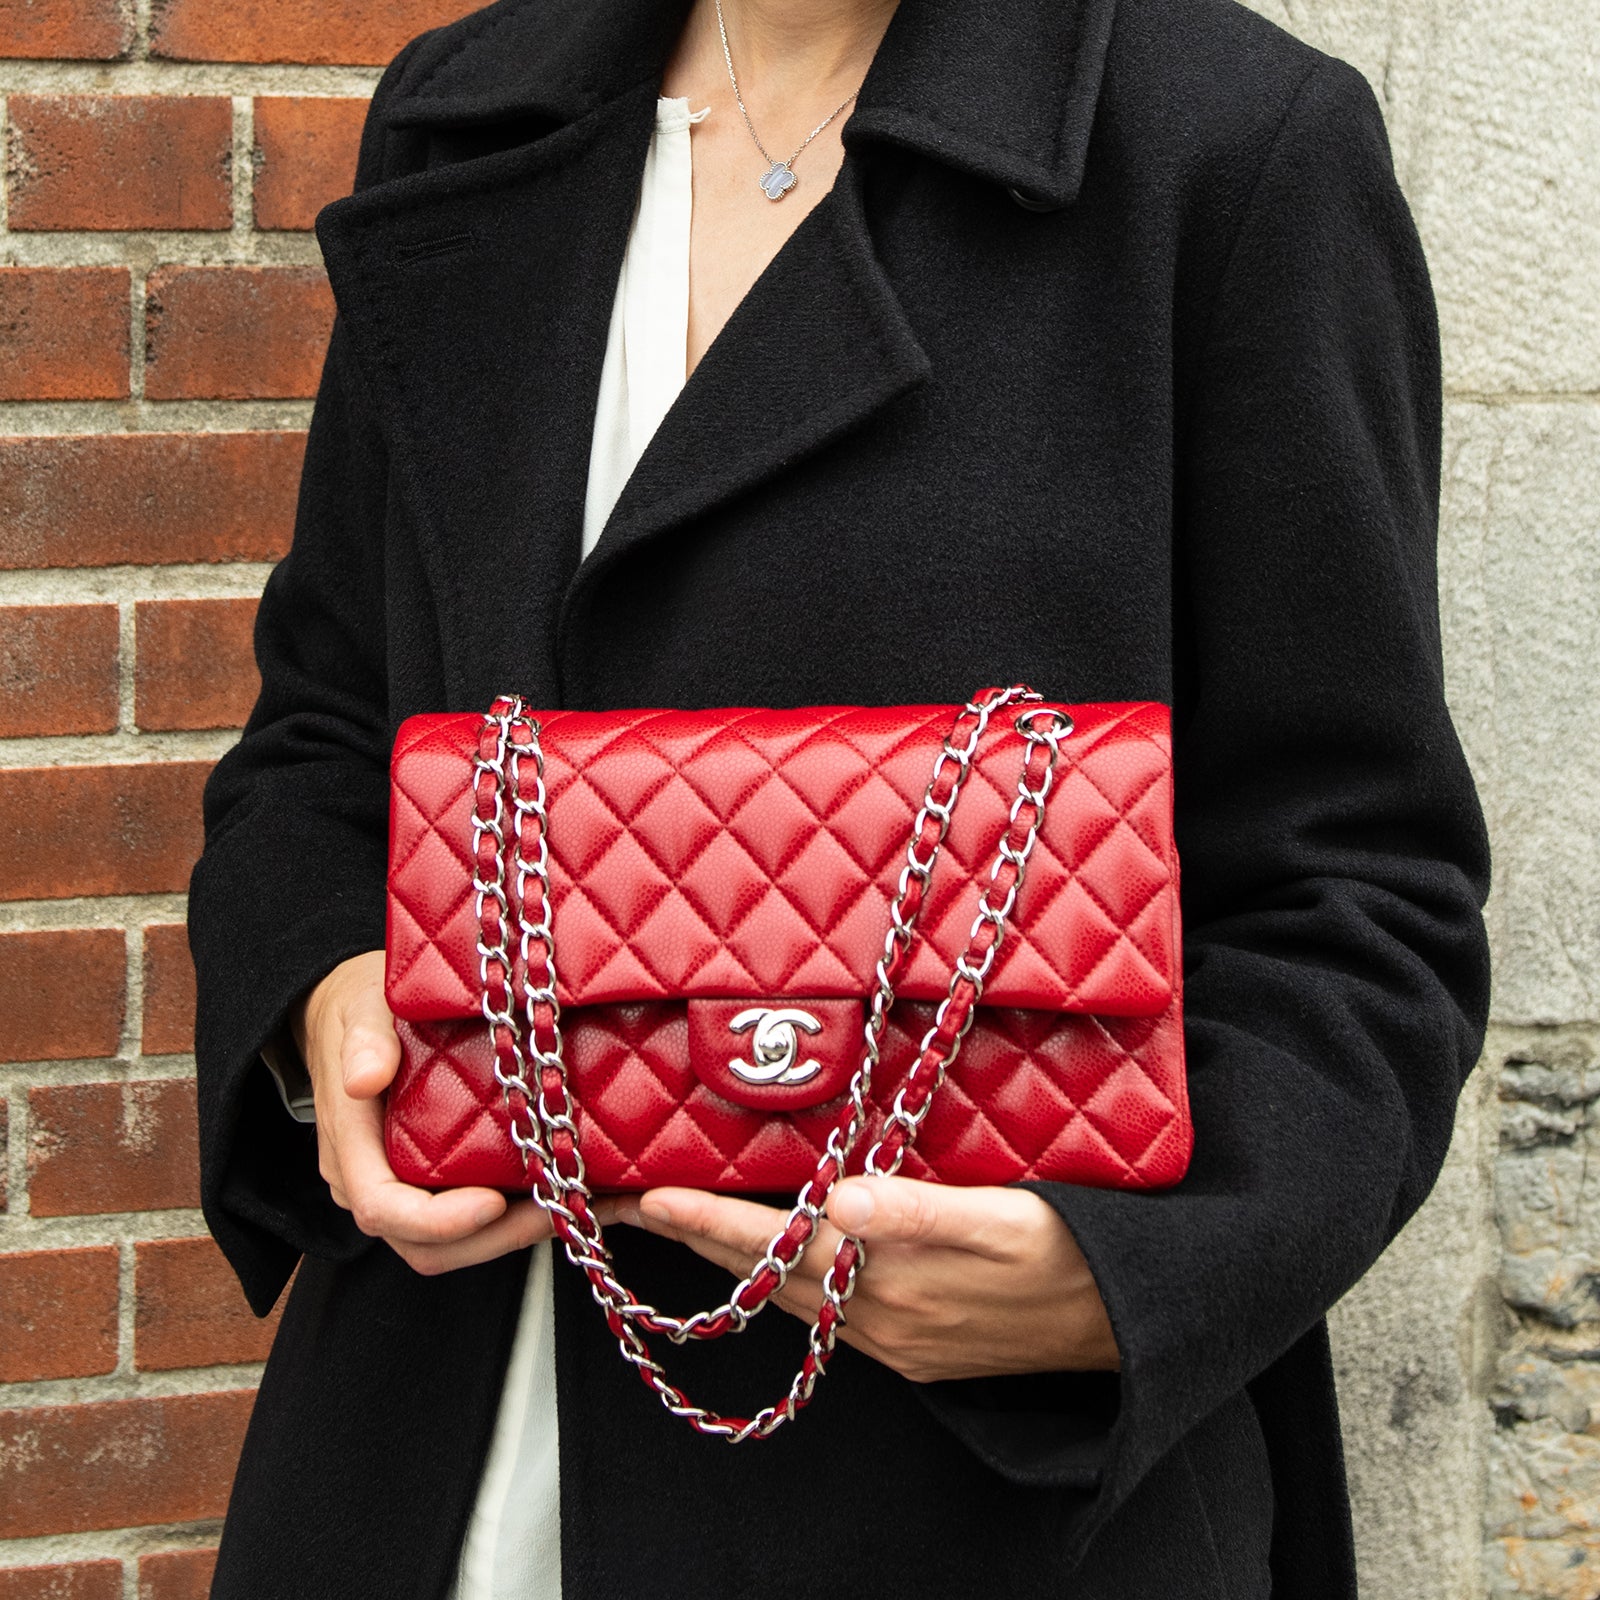 Chanel Red Quilted Caviar Maxi Classic Double Flap Bag, myGemma, CH